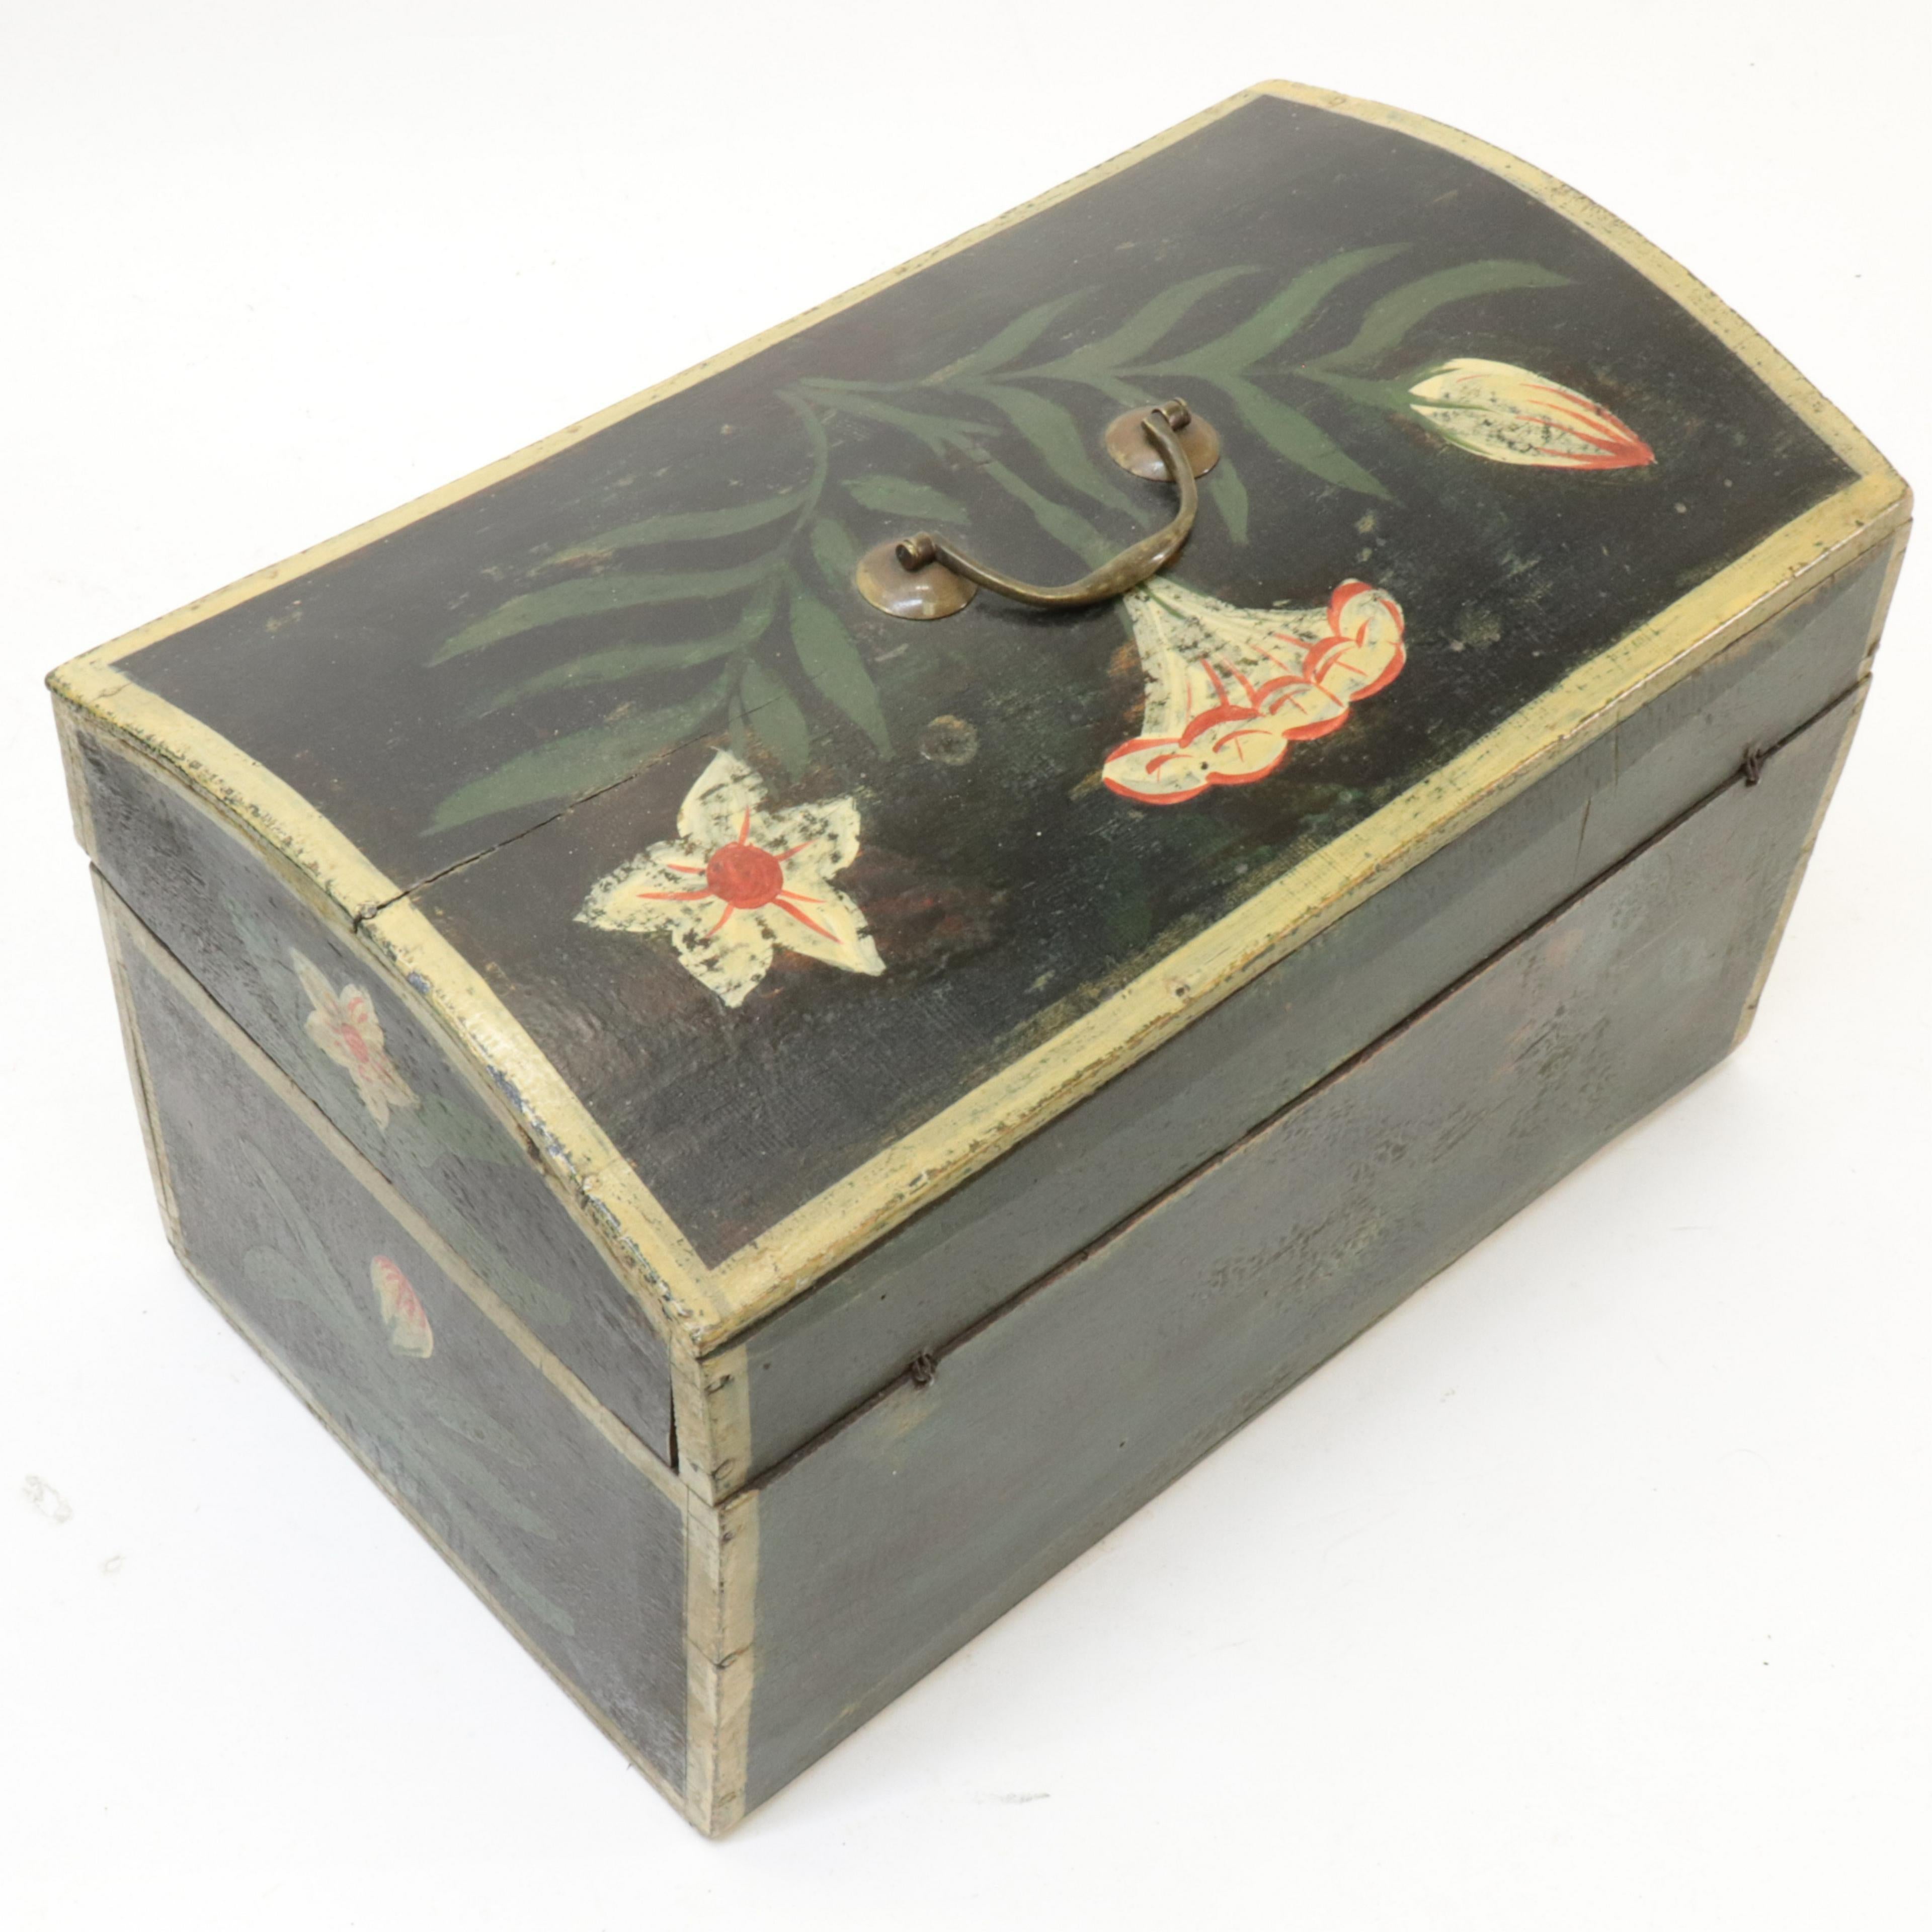 Two early 19th century French Folk Art painted dome-top wedding boxes in beech, decorated with painted flowers, swags, hearts and other motifs. These were traditional filled with linens and other soft goods and given to a bride onher wedding